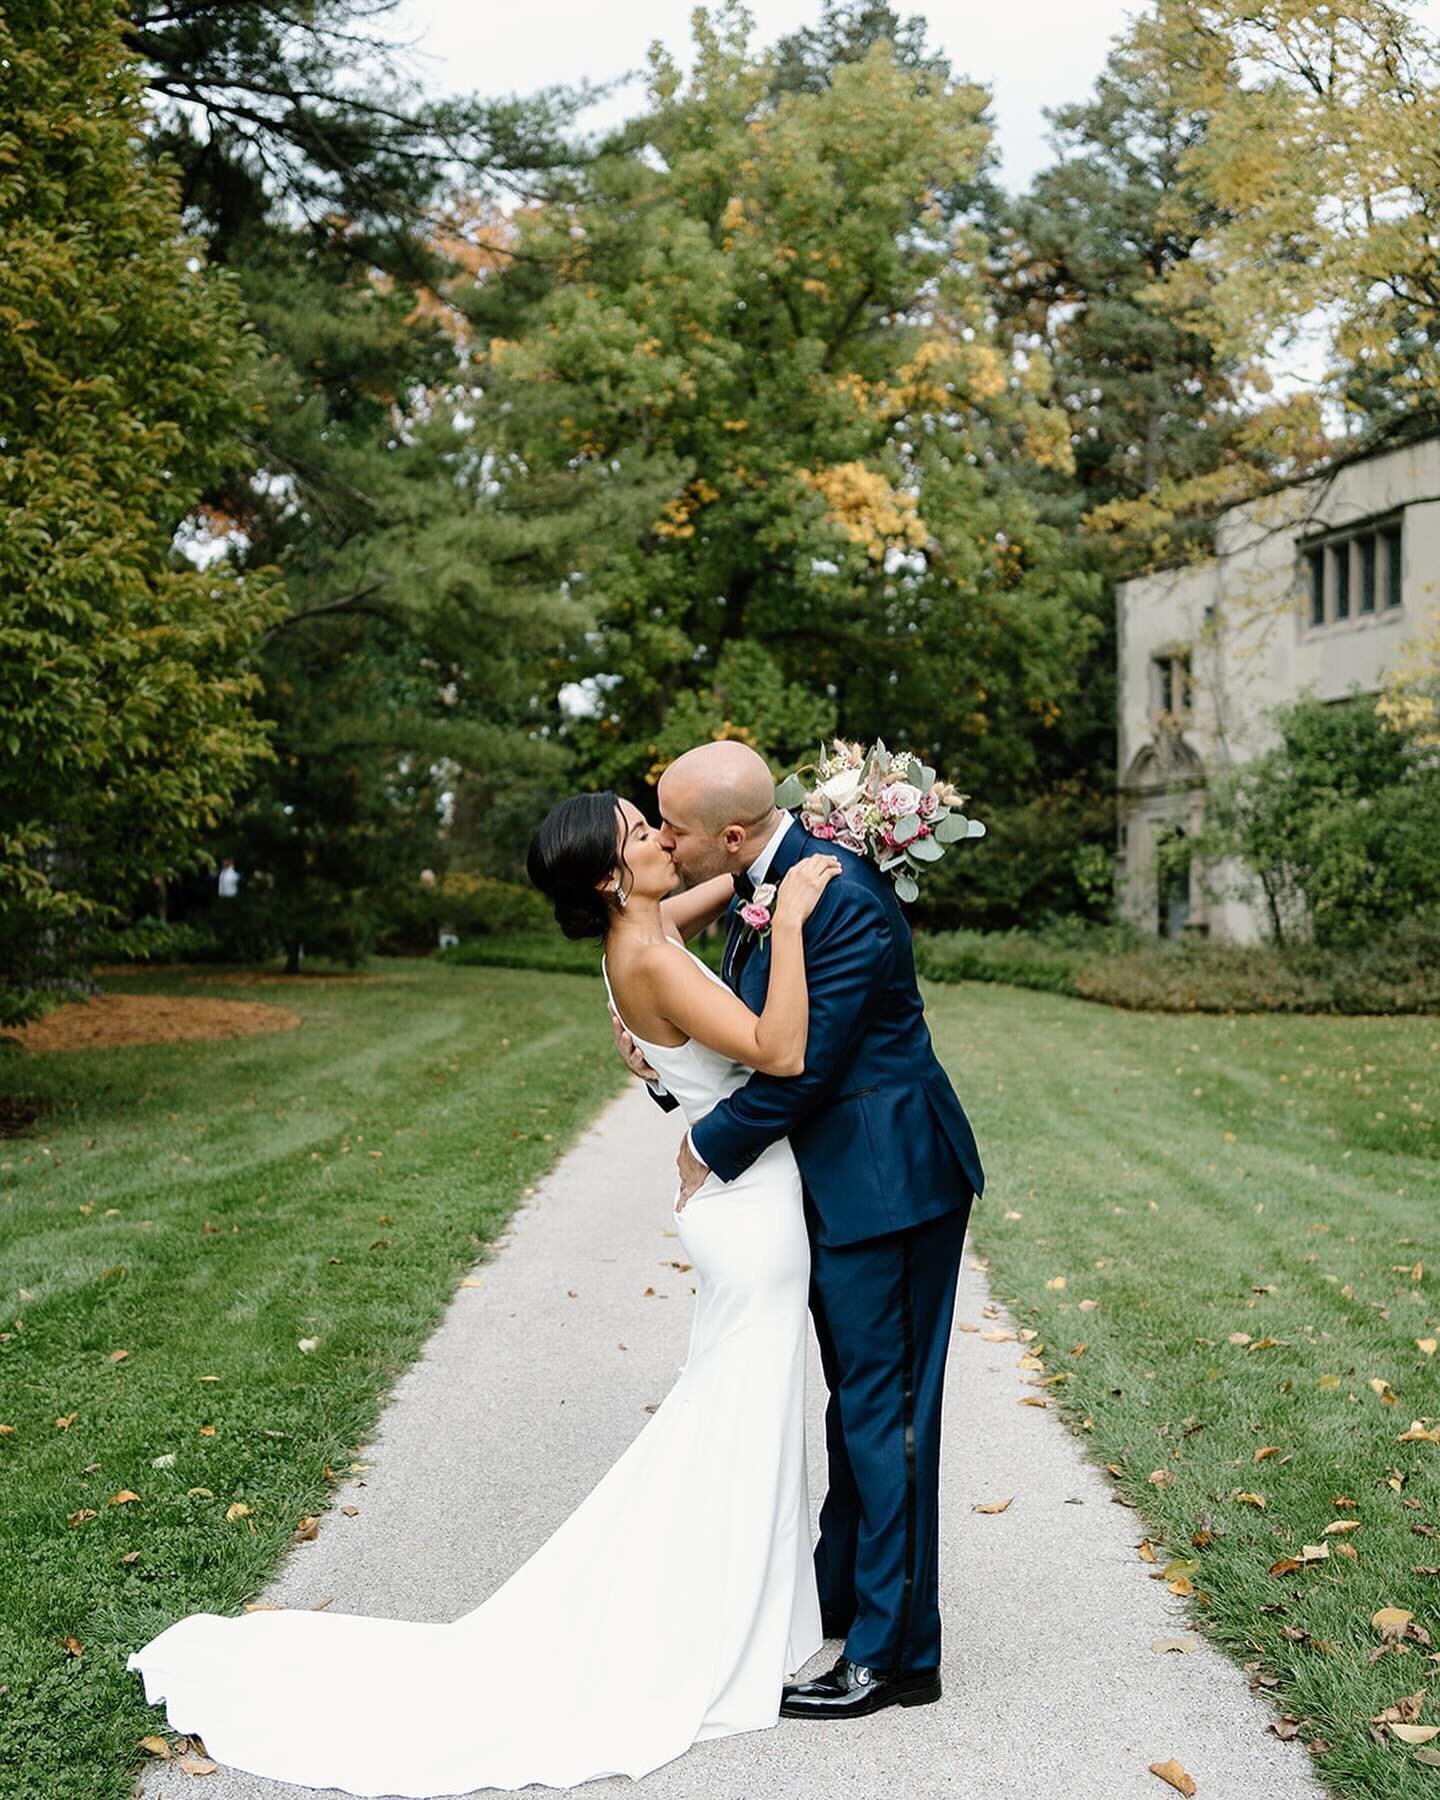 Anthony &amp; Christina are MARRIED! They had an intimate ceremony at Morton Arboretum with their closest friends &amp; family, then invited all of their loved ones to come to their favorite local bar DJ&rsquo;s where they&rsquo;re regulars. One of t